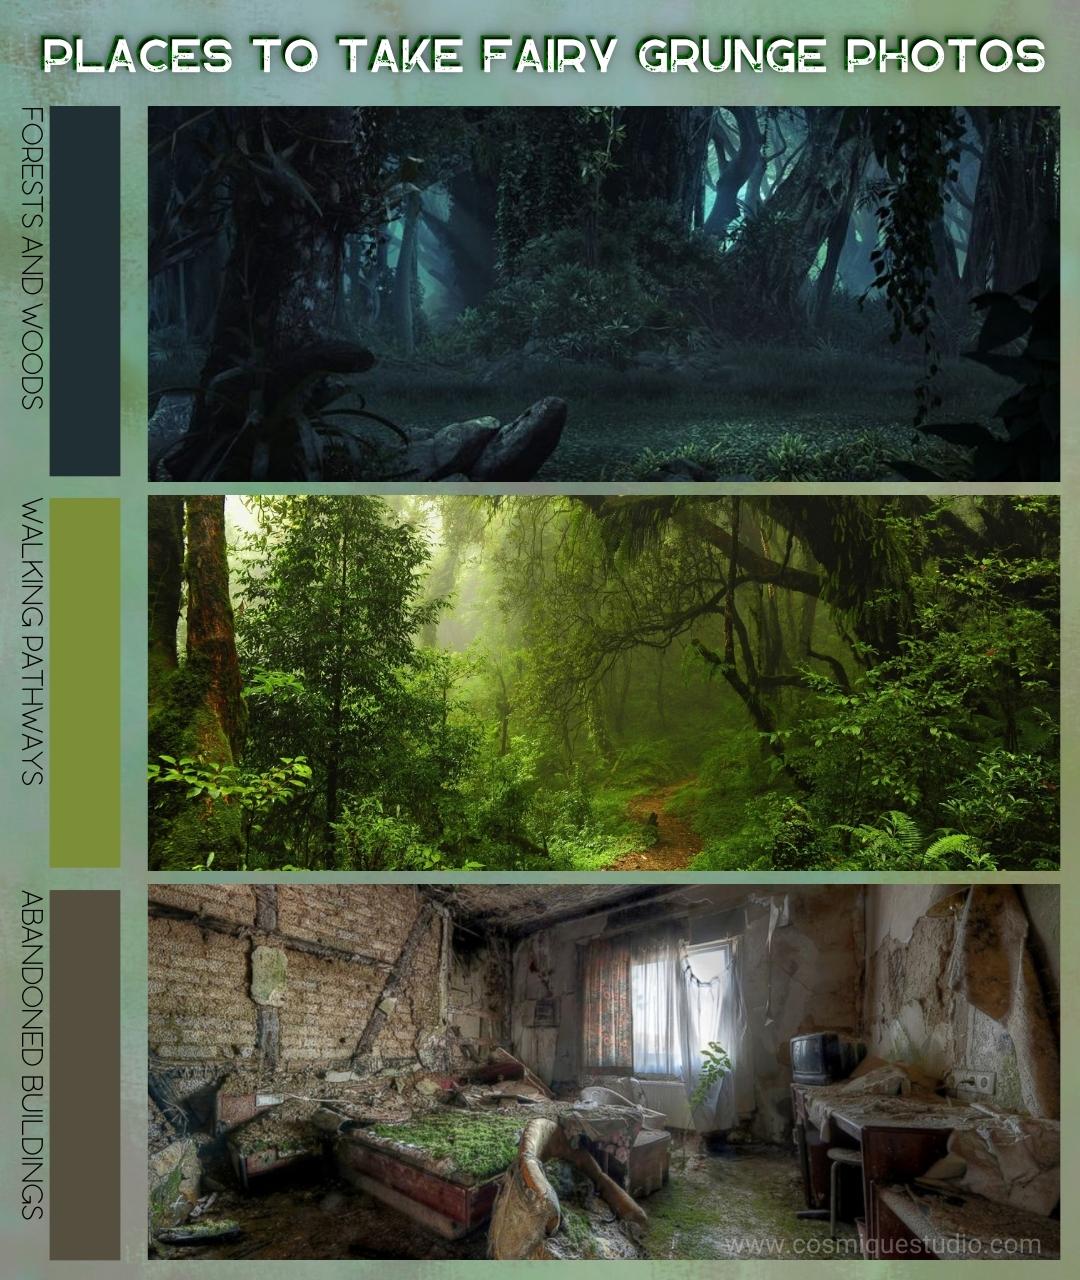 Three places to take fairy grunge photos to post on social media: Forests and woods, walking pathaways, and abandoned buildings.